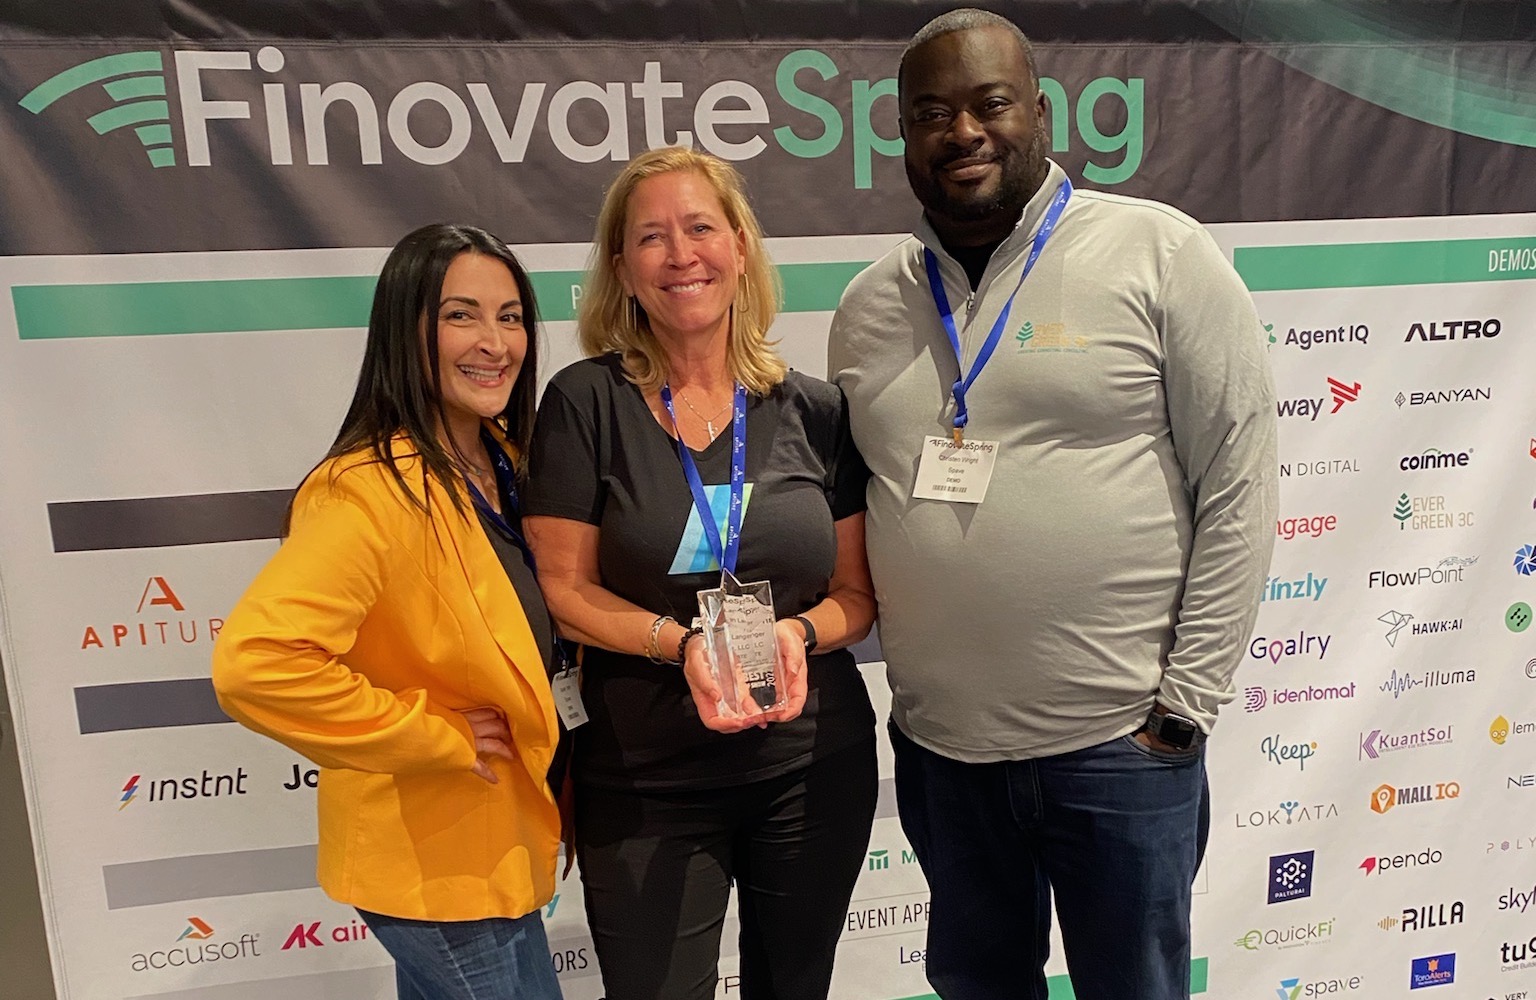 Spave won Best Of Show at FinovateSpring 2022.